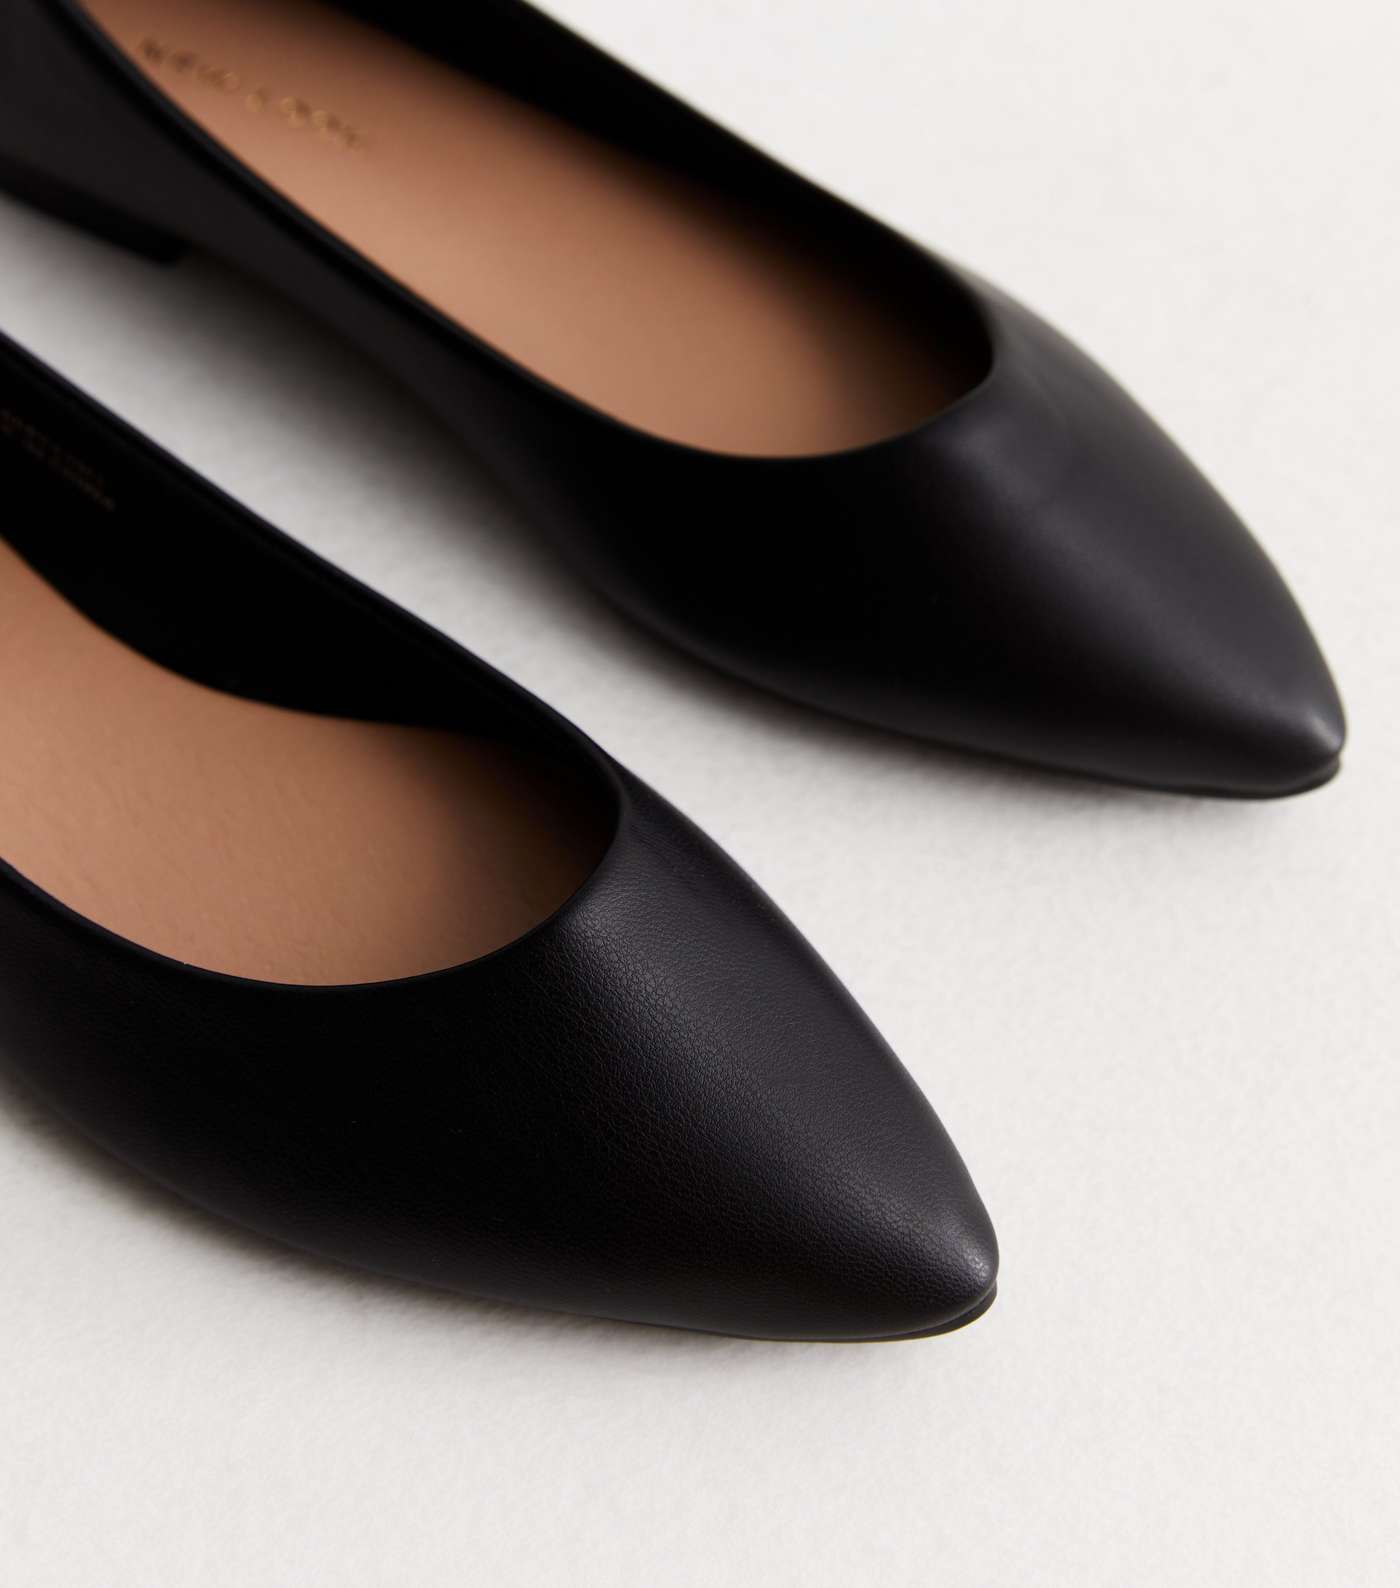 Black Leather-Look Pointed Ballerina Pumps Image 3